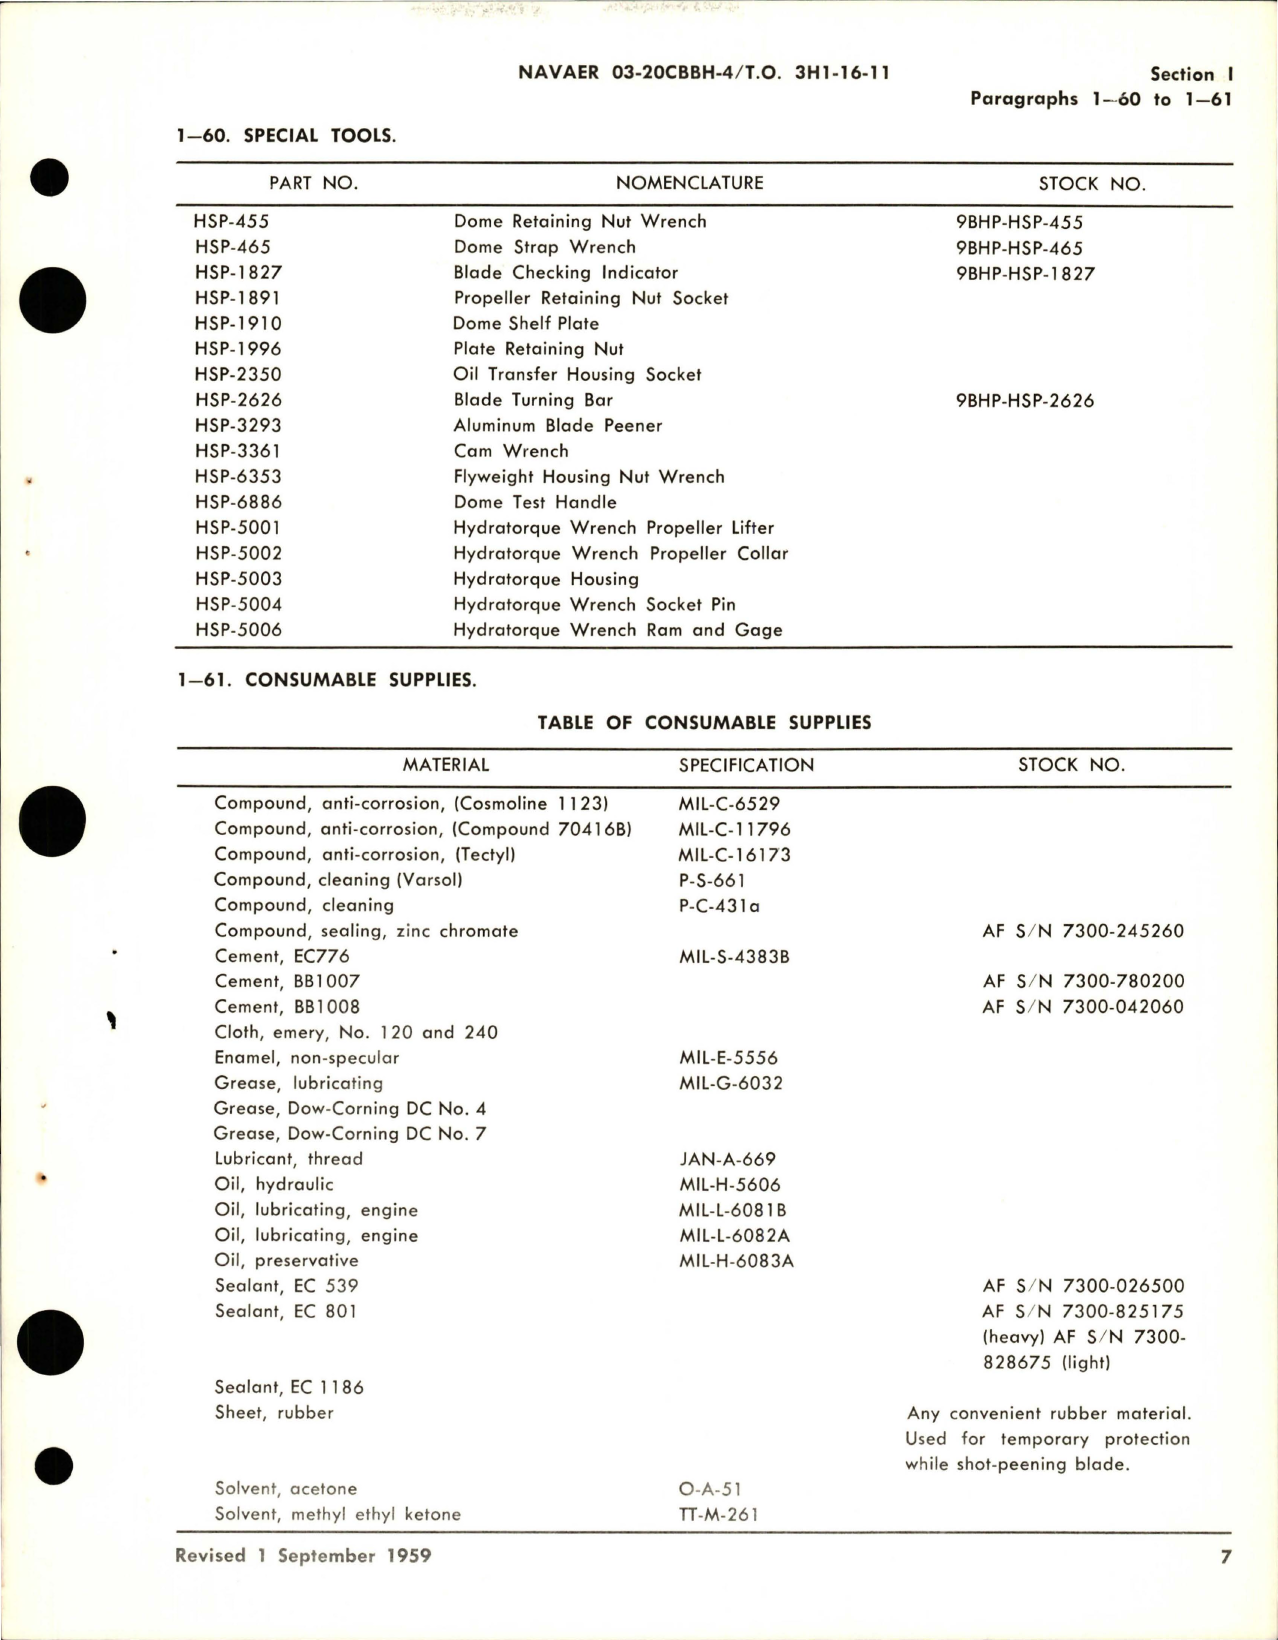 Sample page 5 from AirCorps Library document: Operation and Maintenance Instructions for Variable Pitch Propeller - Model 43H60-359 and 43H60-383